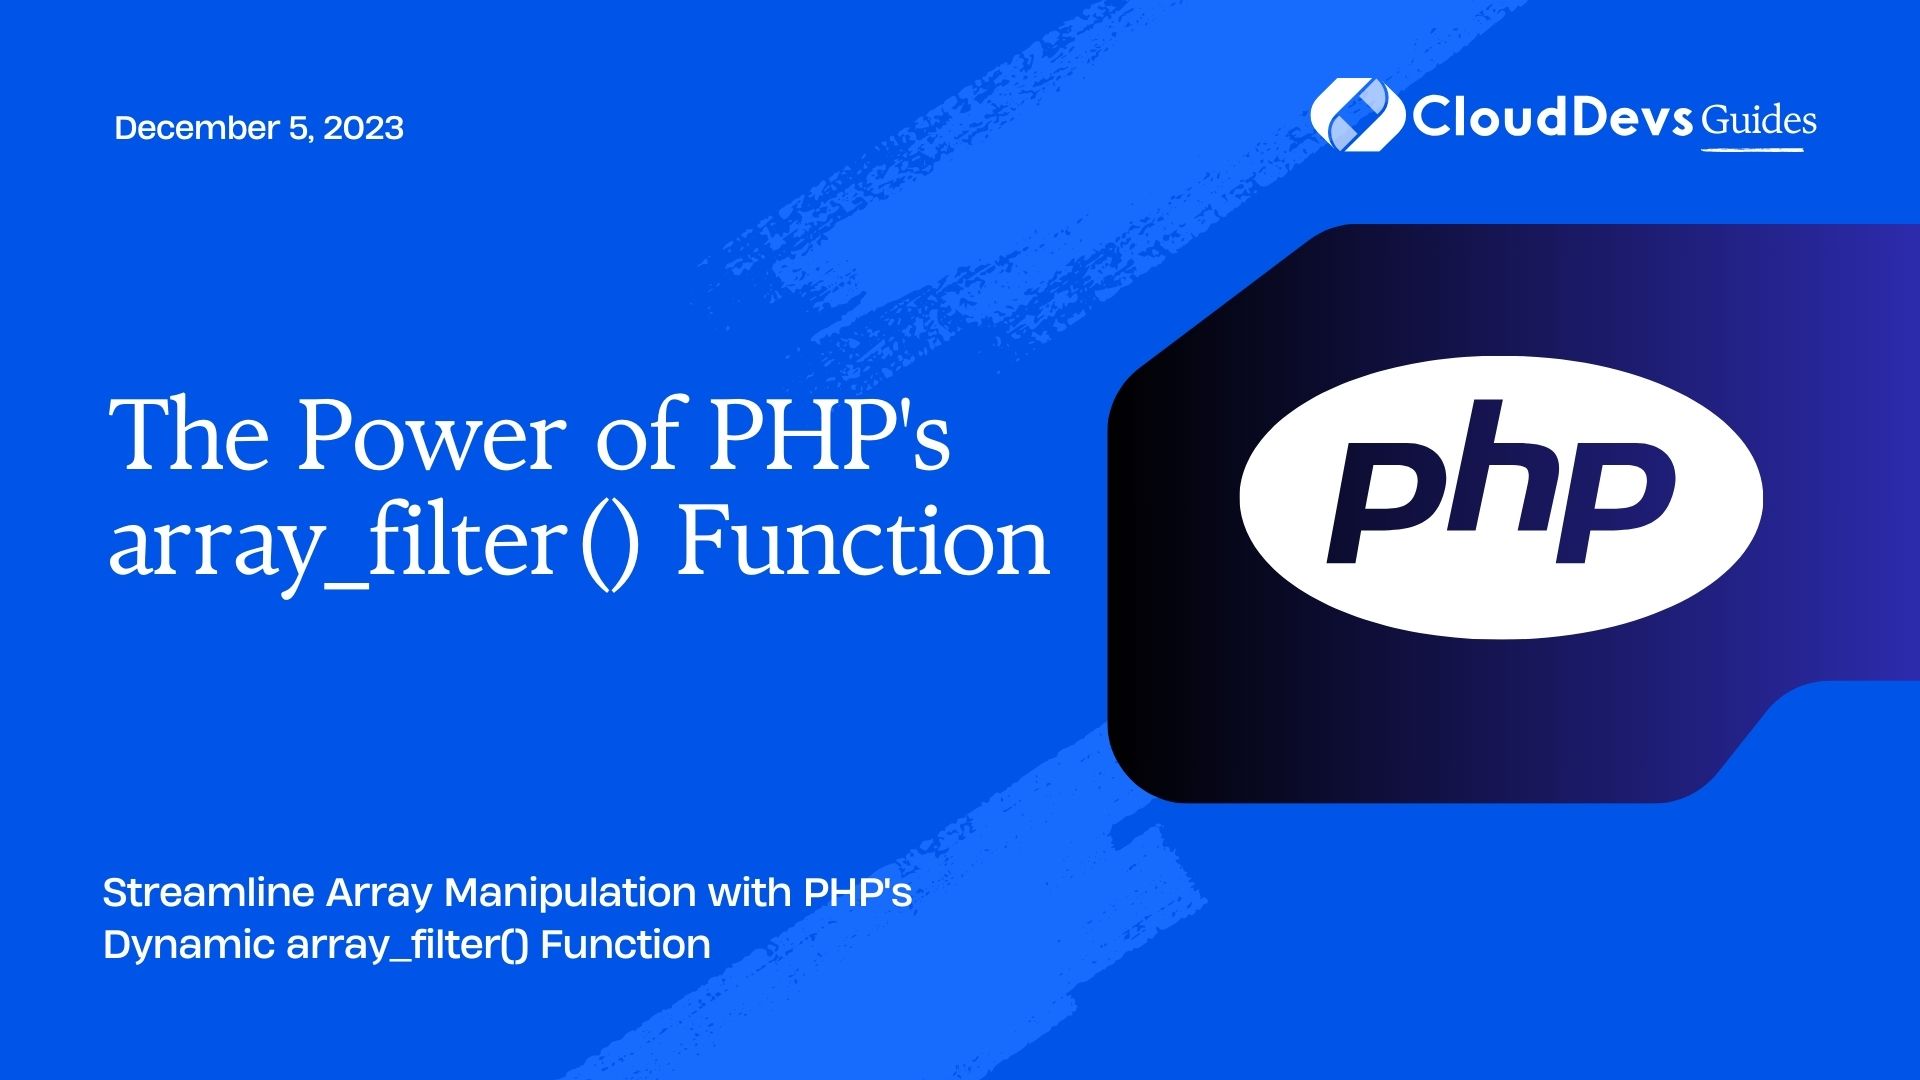 The Power of PHP's array_filter() Function